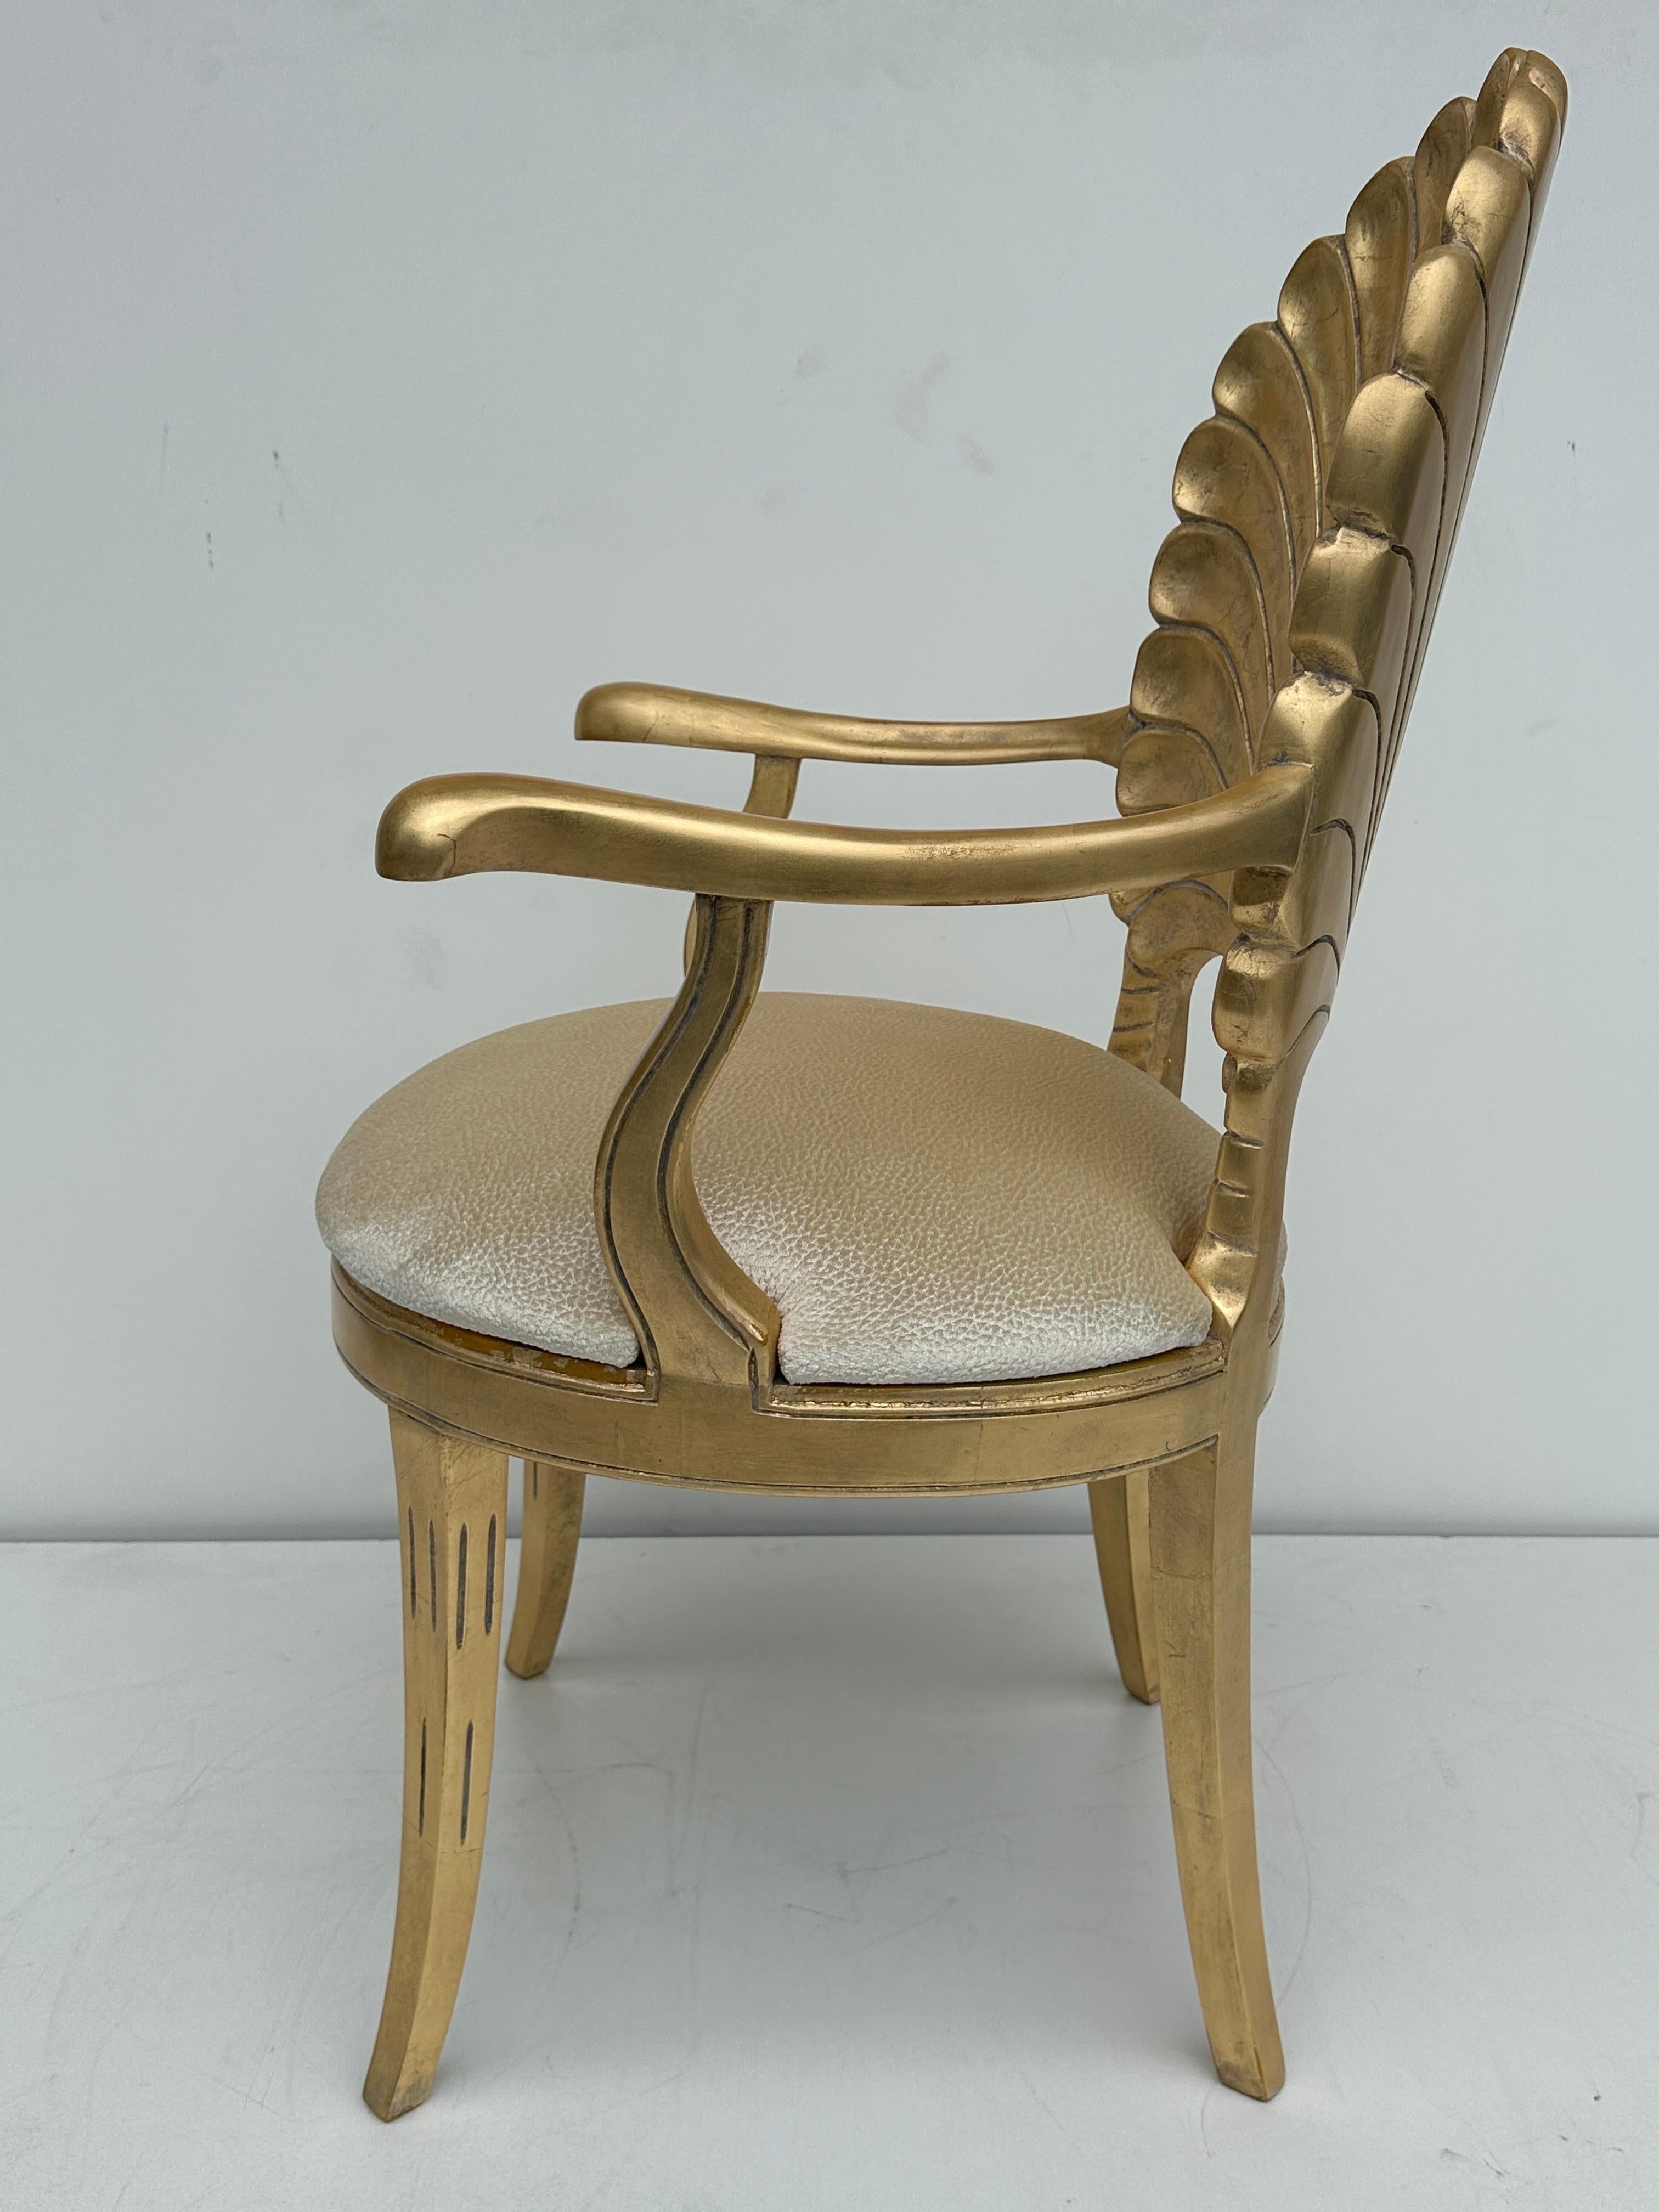 Spanish Gold Leaf Venetian Grotto Style Shell Back Chair For Sale